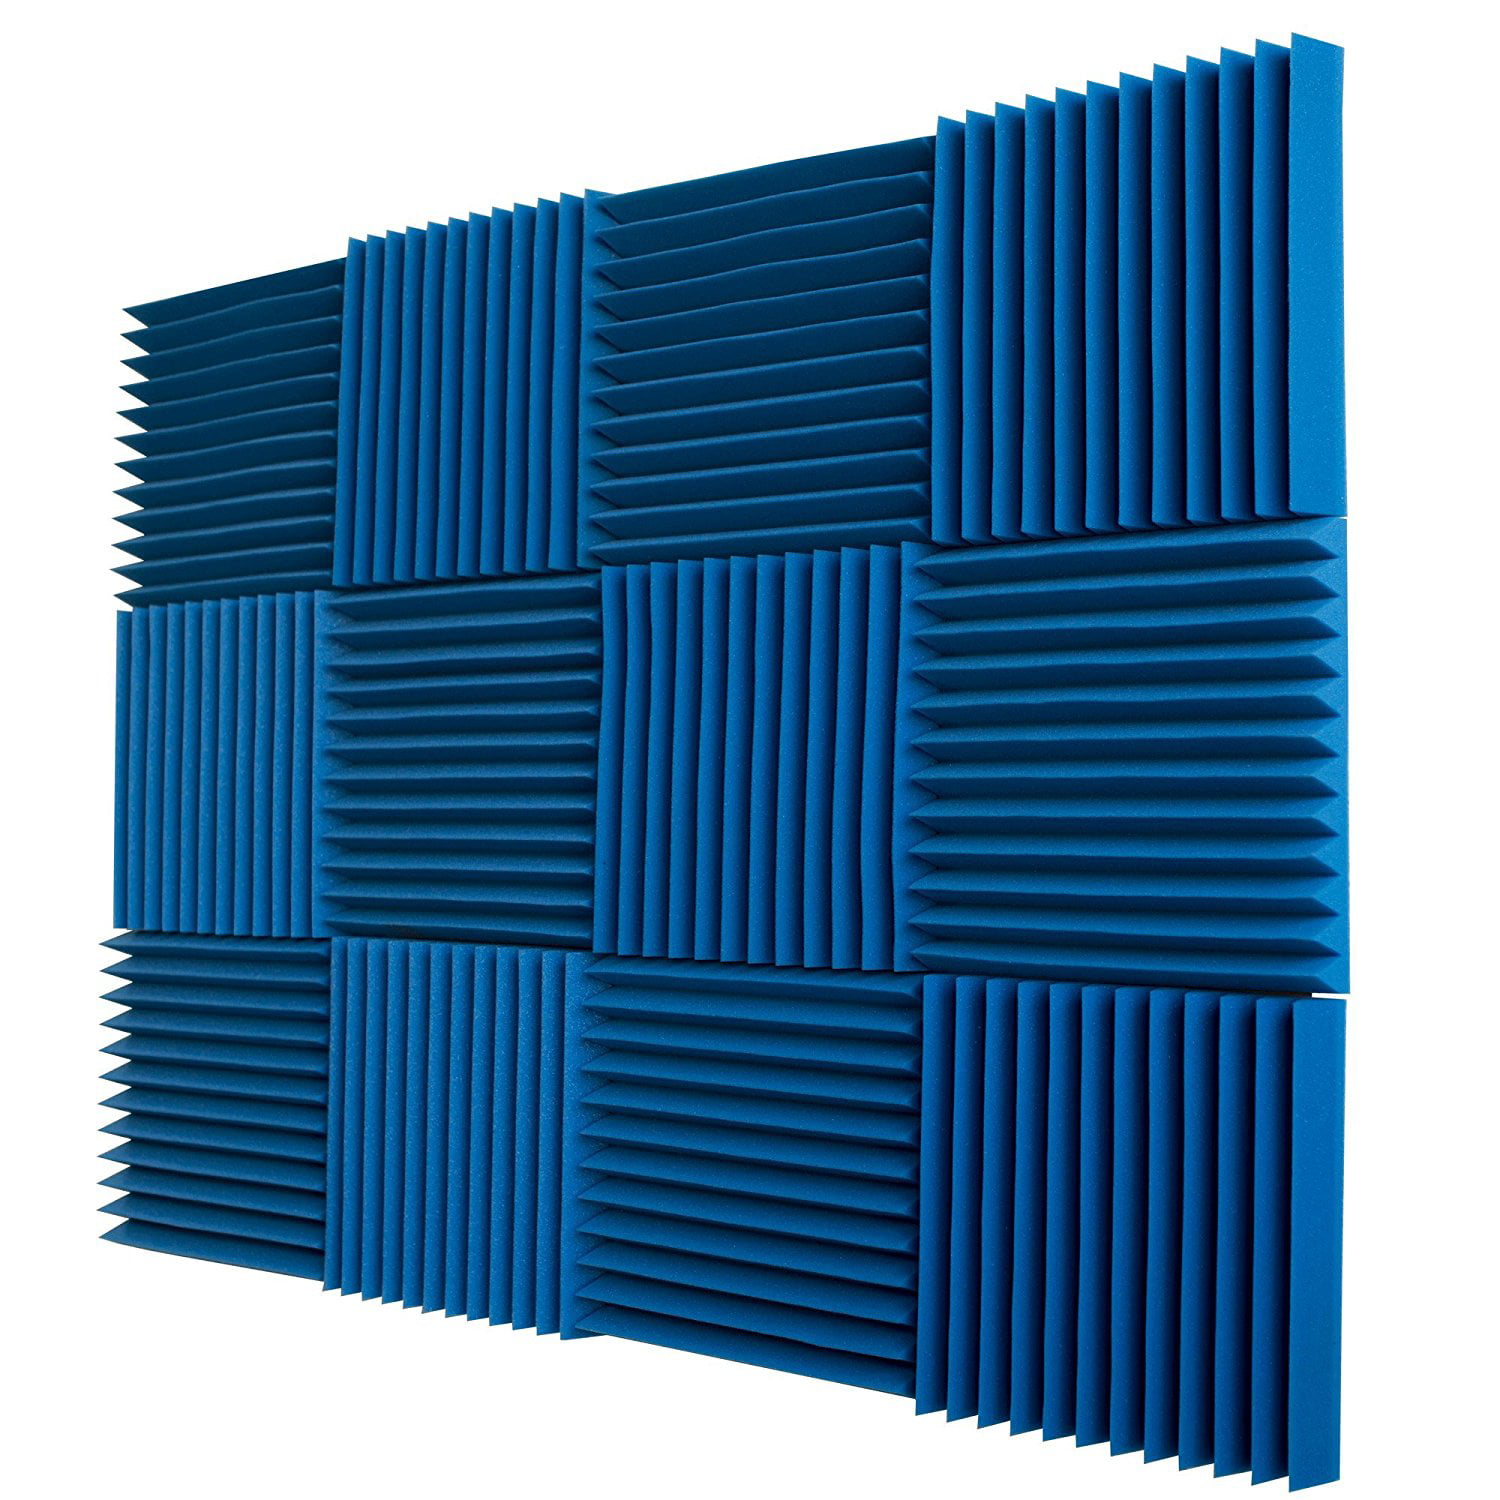 12 Acoustic Foam Tiles Wall Record Studio Sound Proof 12